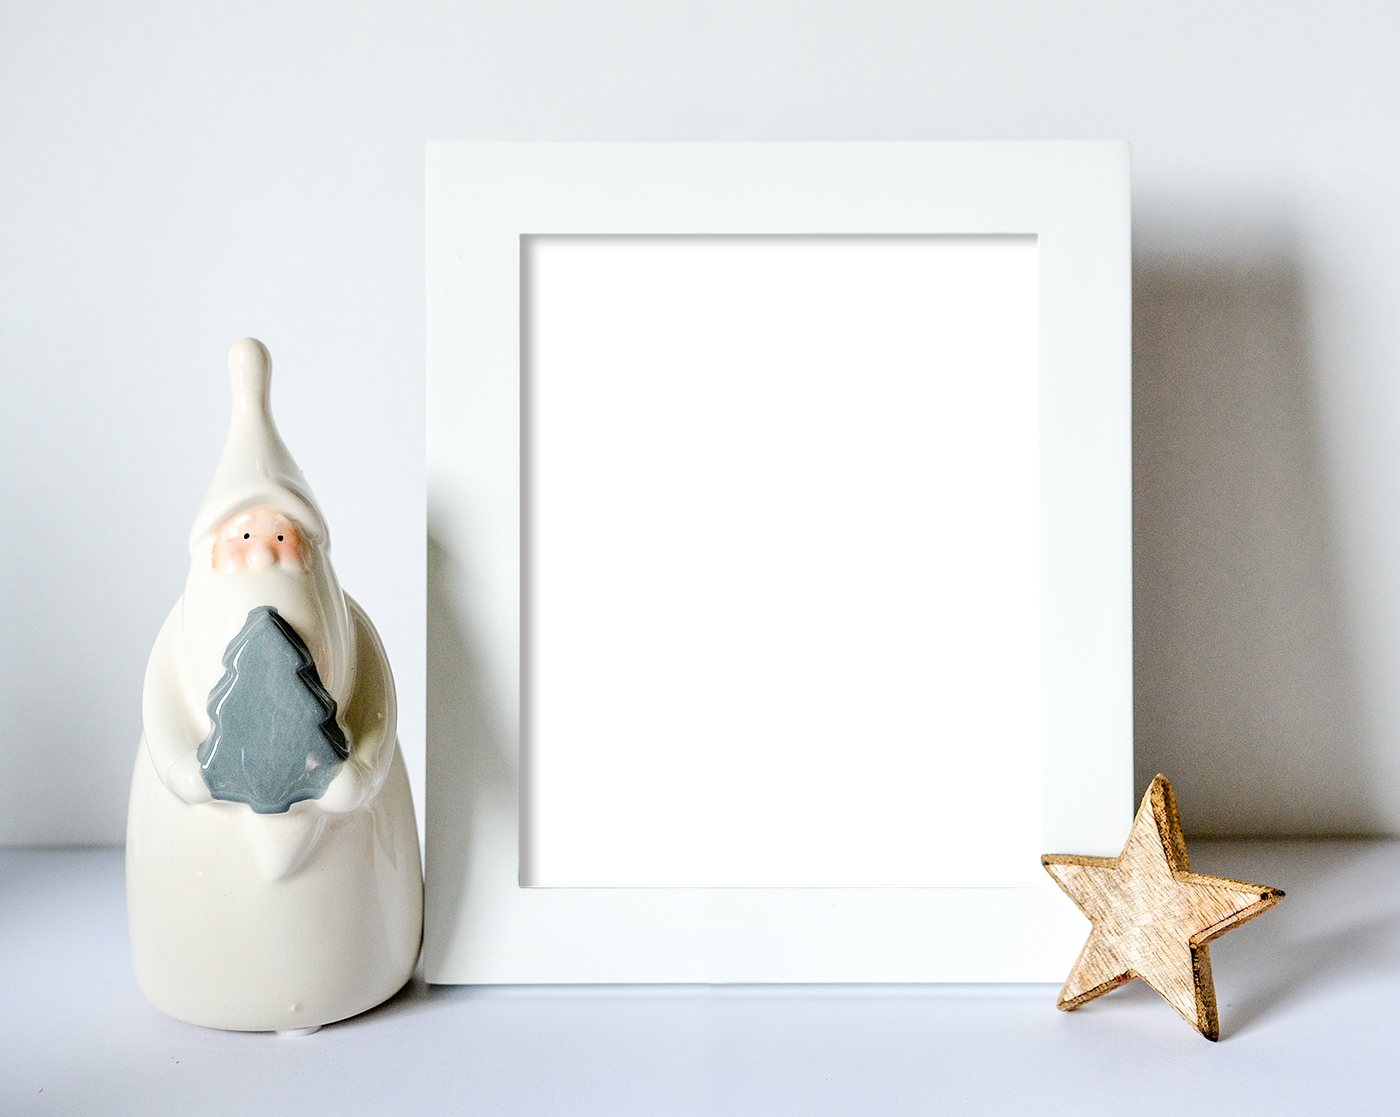 Download Download Free Christmas Frame Mockup With Santa Claus And A Christmas Frame Mockup Free Png Image With No Background Pngkey Com PSD Mockup Templates